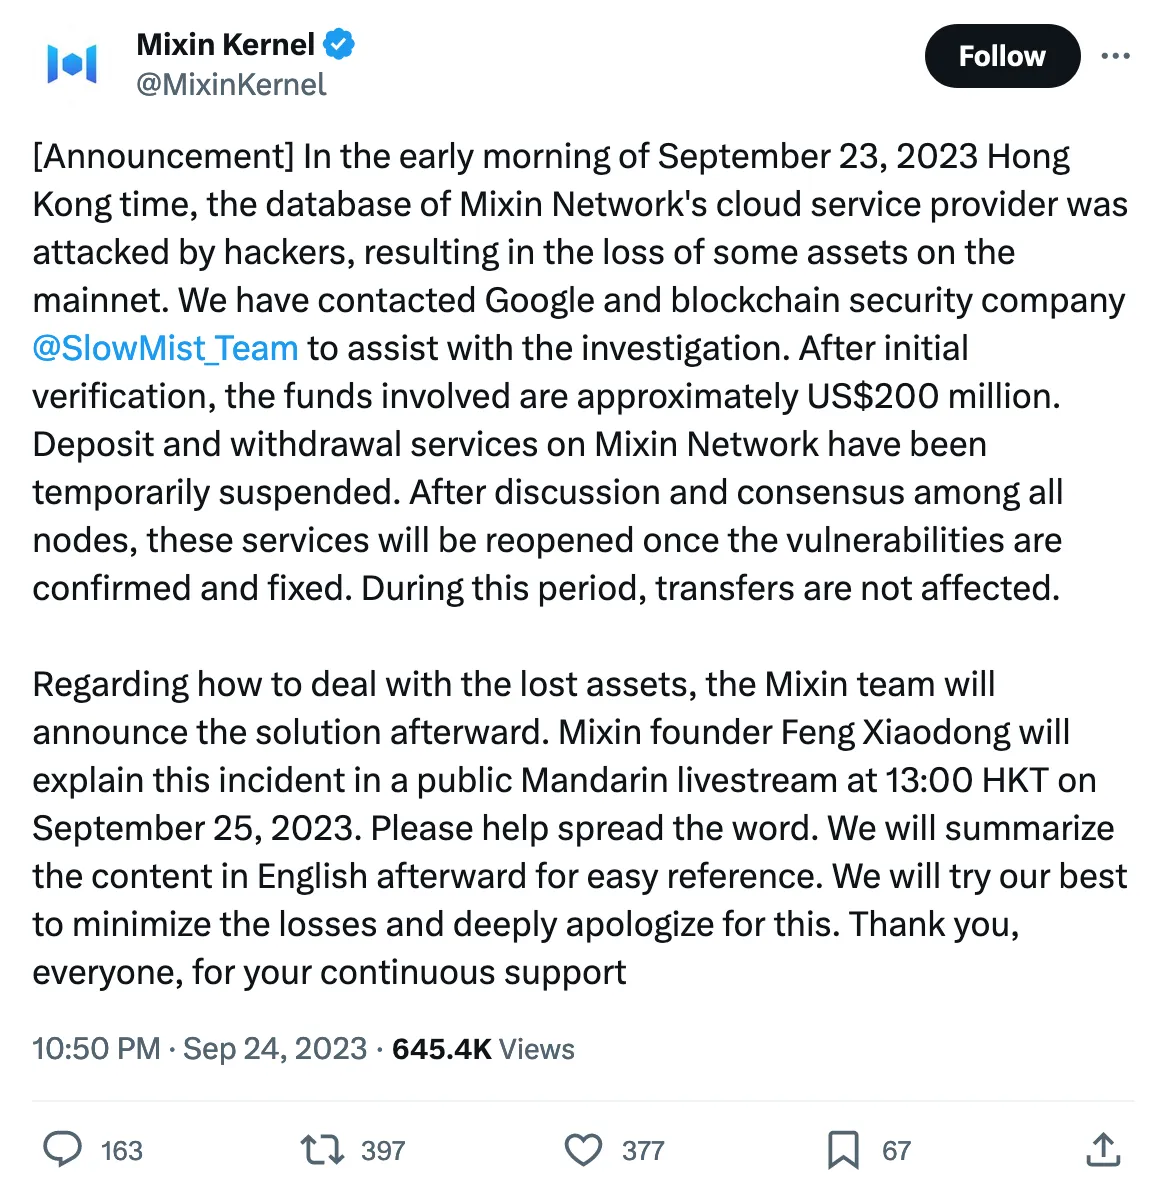 [Announcement] In the early morning of September 23, 2023 Hong Kong time, the database of Mixin Network's cloud service provider was attacked by hackers, resulting in the loss of some assets on the mainnet. We have contacted Google and blockchain security company 
@SlowMist_Team
 to assist with the investigation. After initial verification, the funds involved are approximately US$200 million. Deposit and withdrawal services on Mixin Network have been temporarily suspended. After discussion and consensus among all nodes, these services will be reopened once the vulnerabilities are confirmed and fixed. During this period, transfers are not affected.

Regarding how to deal with the lost assets, the Mixin team will announce the solution afterward. Mixin founder Feng Xiaodong will explain this incident in a public Mandarin livestream at 13:00 HKT on September 25, 2023. Please help spread the word. We will summarize the content in English afterward for easy reference. We will try our best to minimize the losses and deeply apologize for this. Thank you, everyone, for your continuous support 
Tweeted at 10:50 PM · Sep 24, 2023